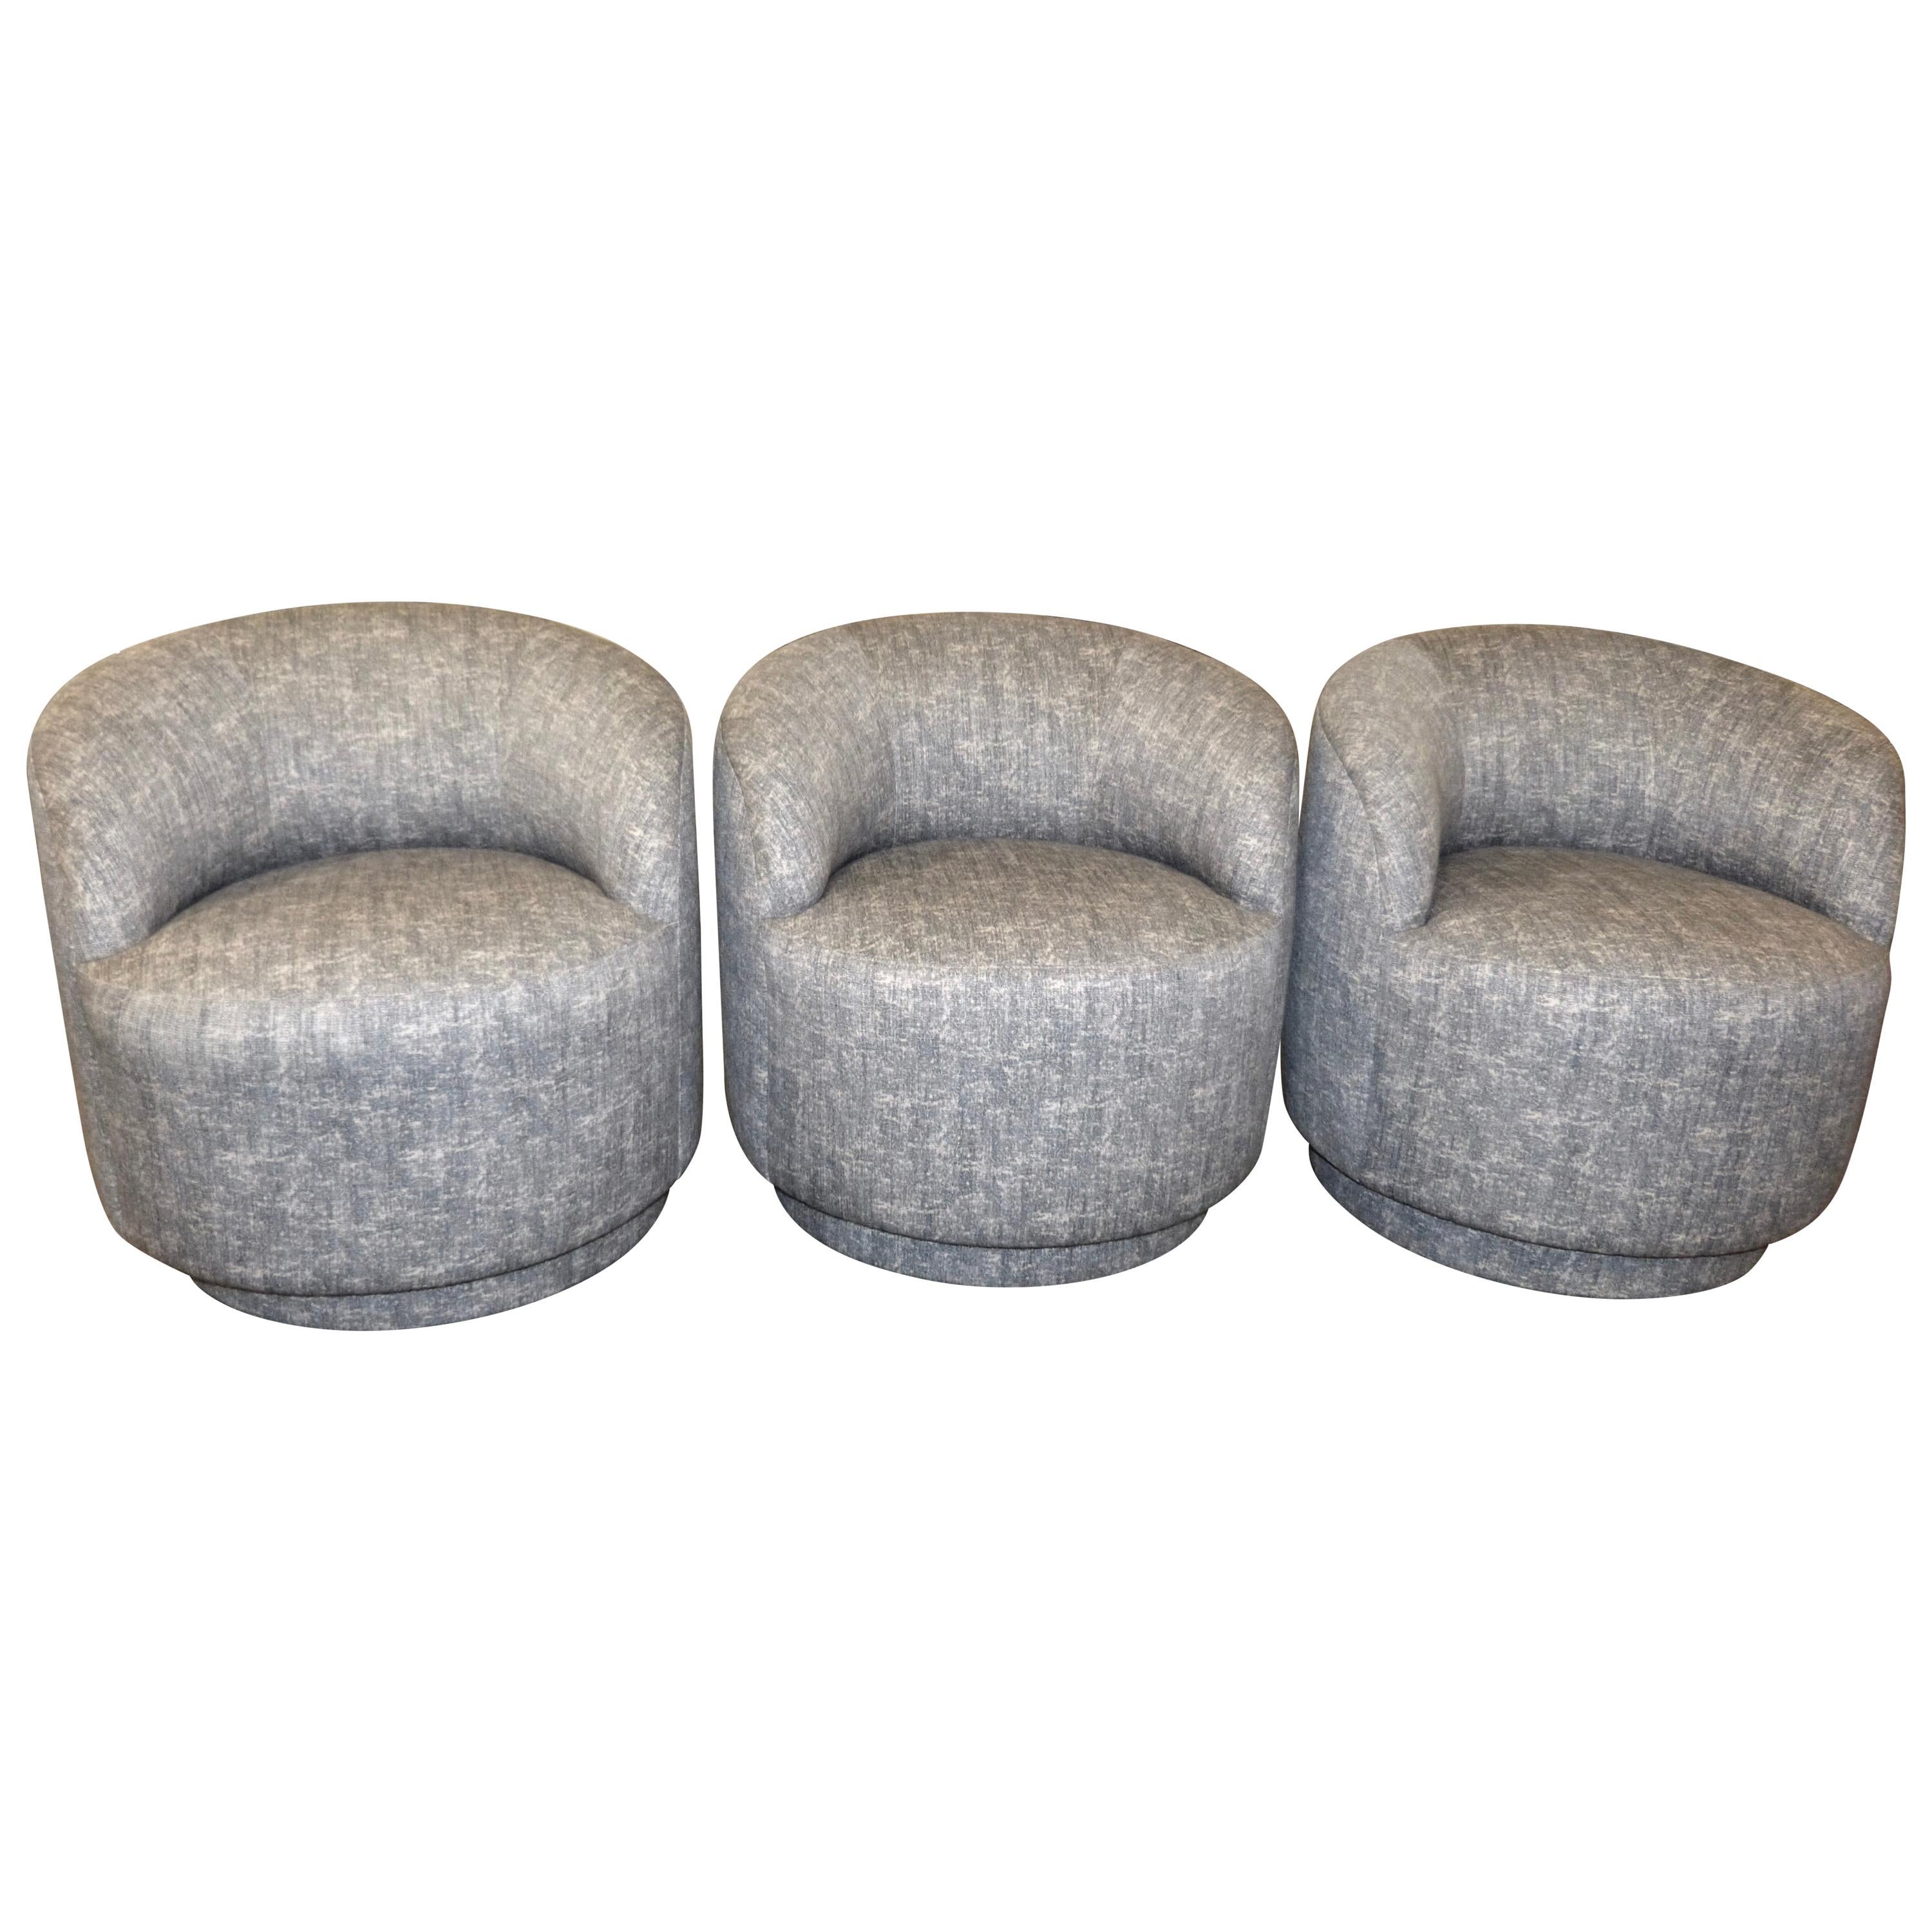 Set of 3 Upholstered Chairs on Platforms